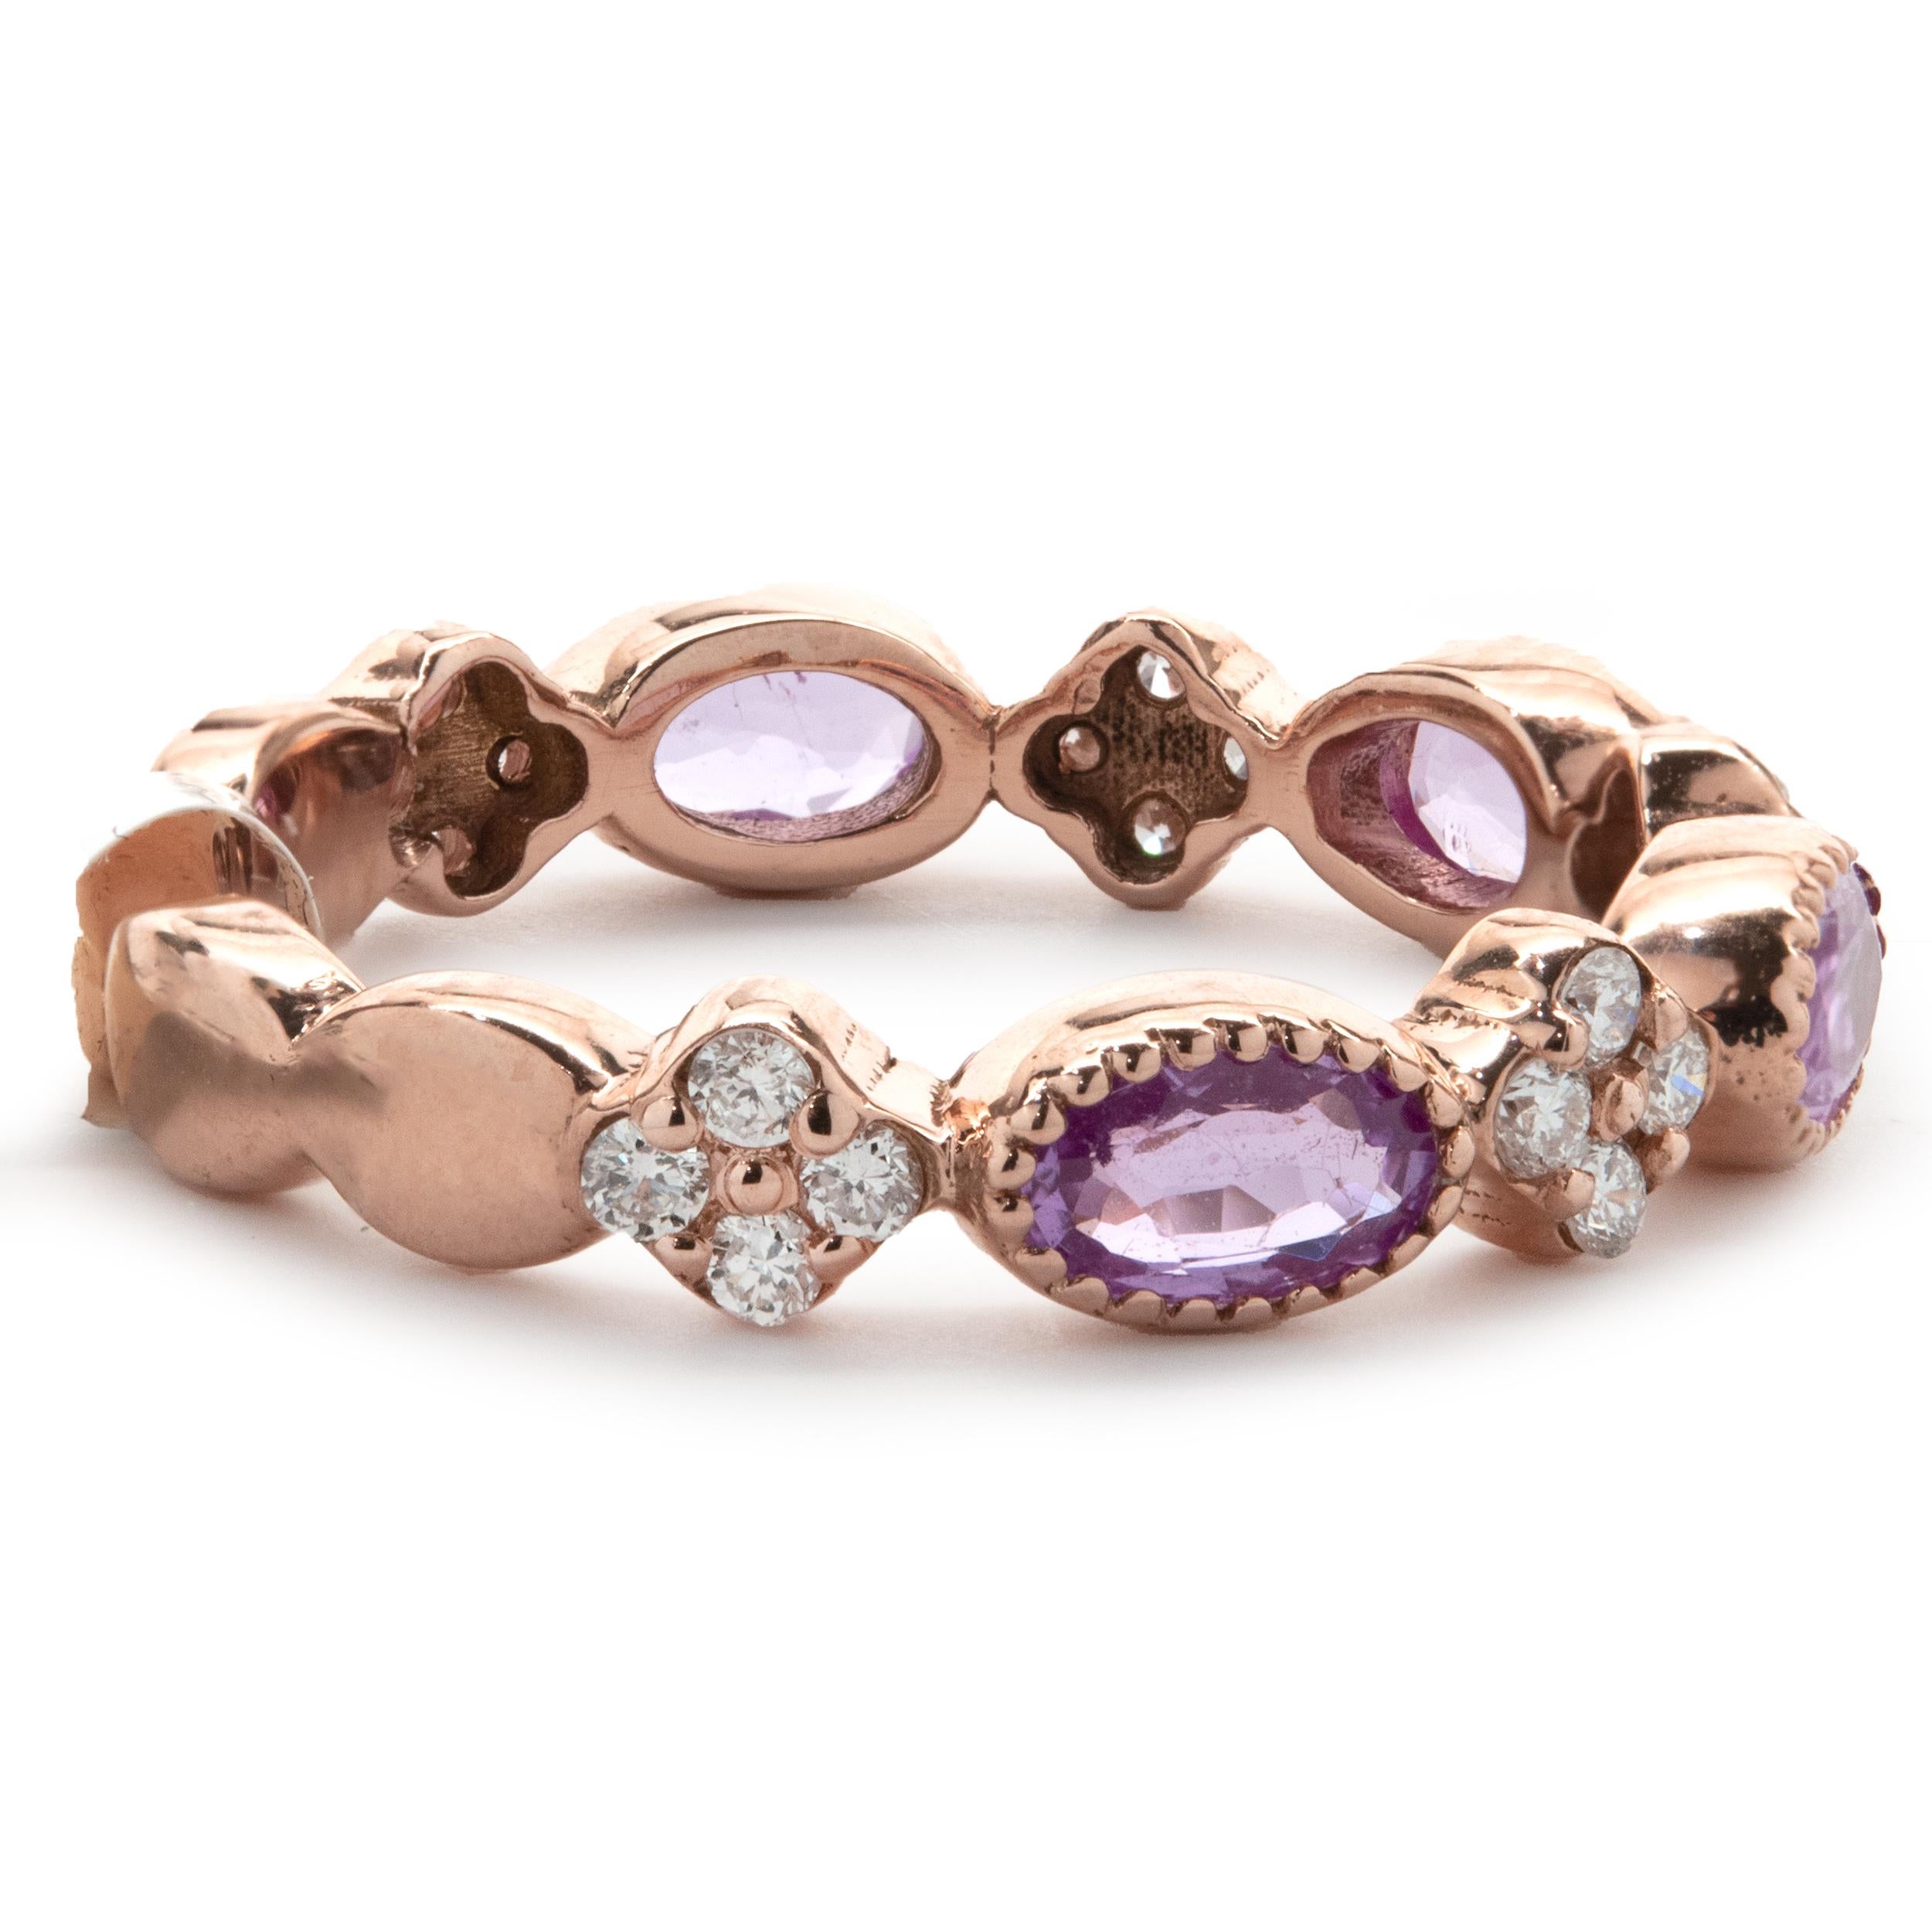 Designer: custom design
Material: 14K rose gold
Pink Sapphire: 4 oval cut = 1.05cttw
Diamond: 20 round brilliant cut = .27cttw
Color: G
Clarity: SI1
Dimensions: band measures 4.10mm wide
Ring Size: 7 (complimentary sizing available)
Weight: 3.25